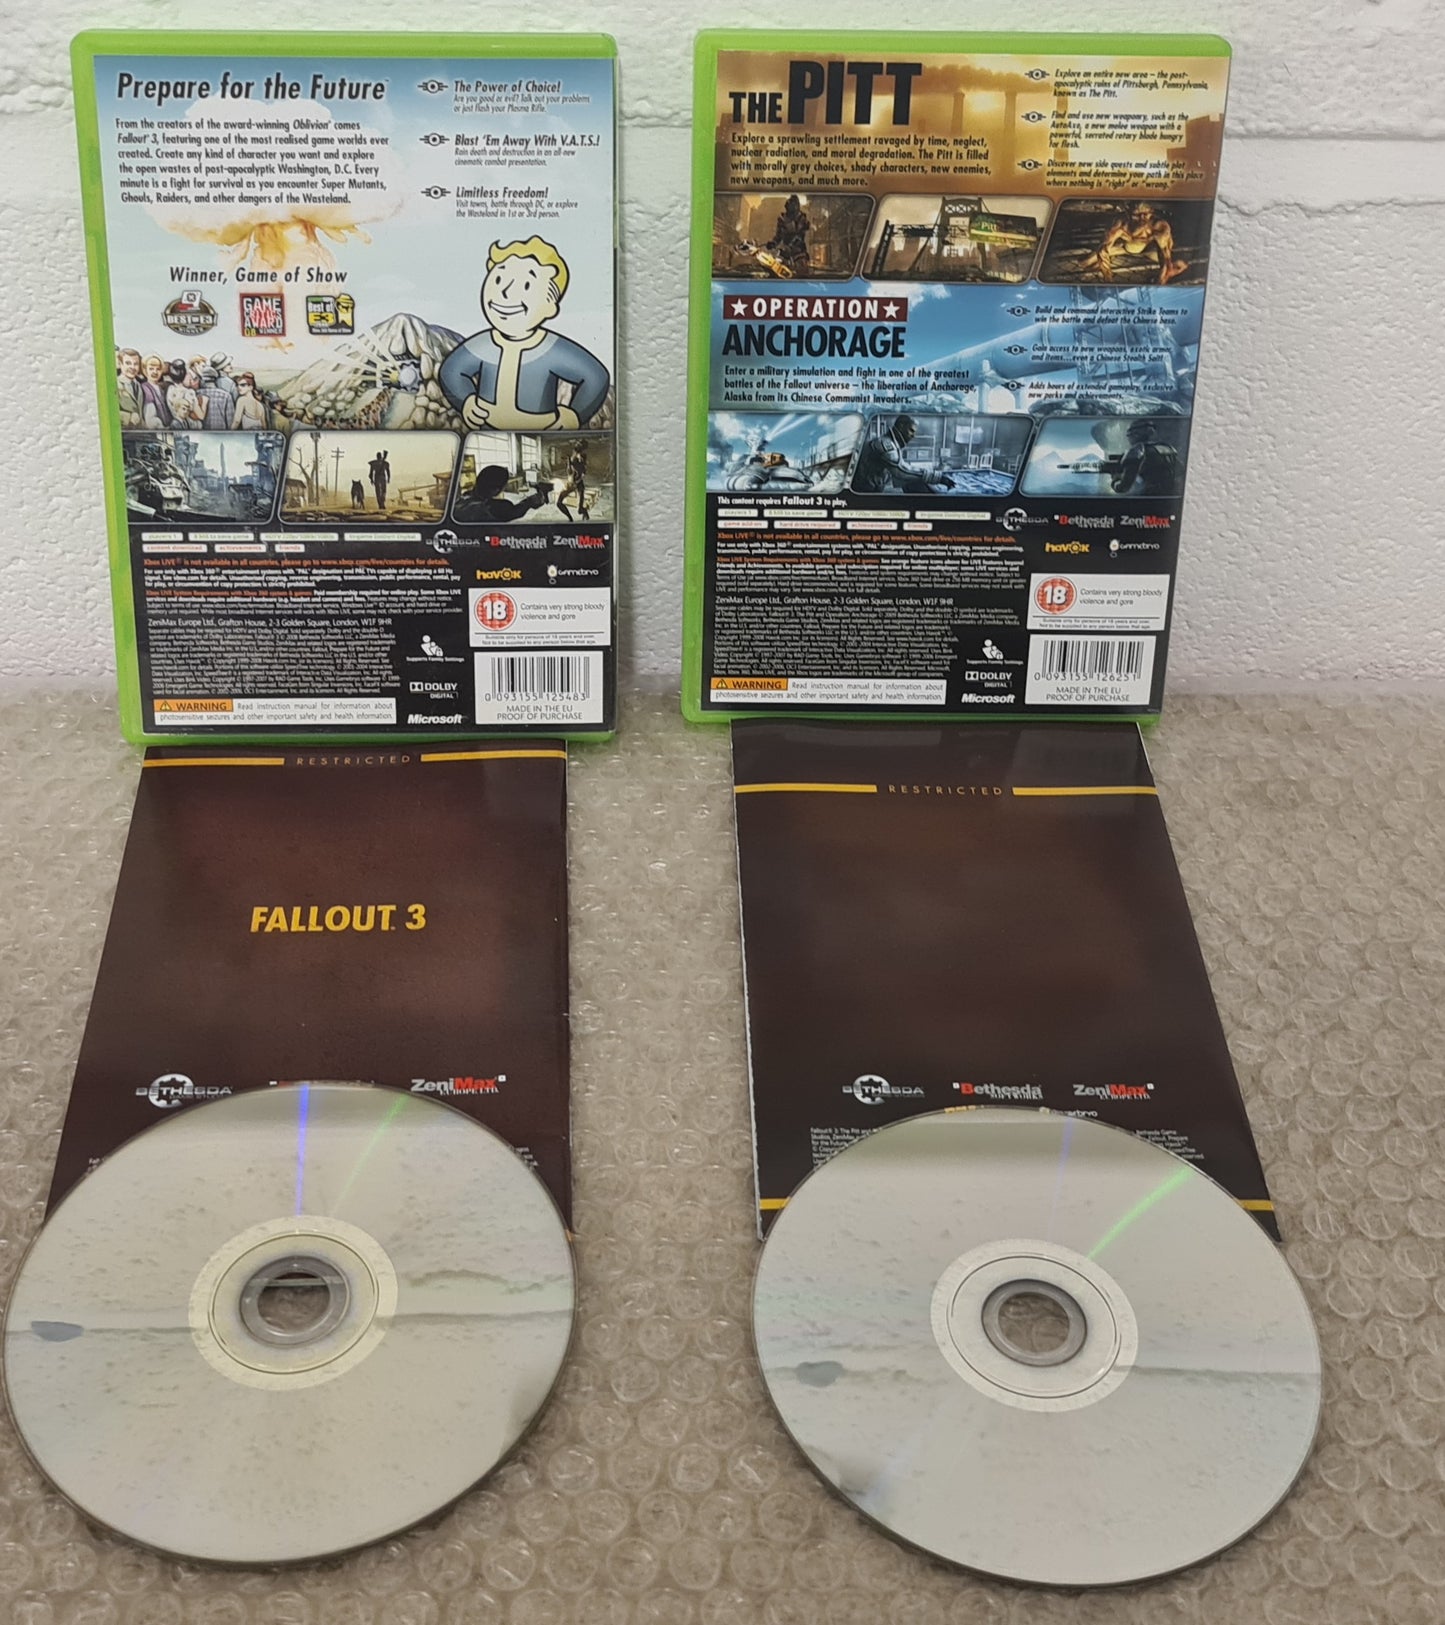 Fallout 3 & Game Add On Pack The Pit & Operation Anchorage Microsoft Xbox 360 Game Bundle